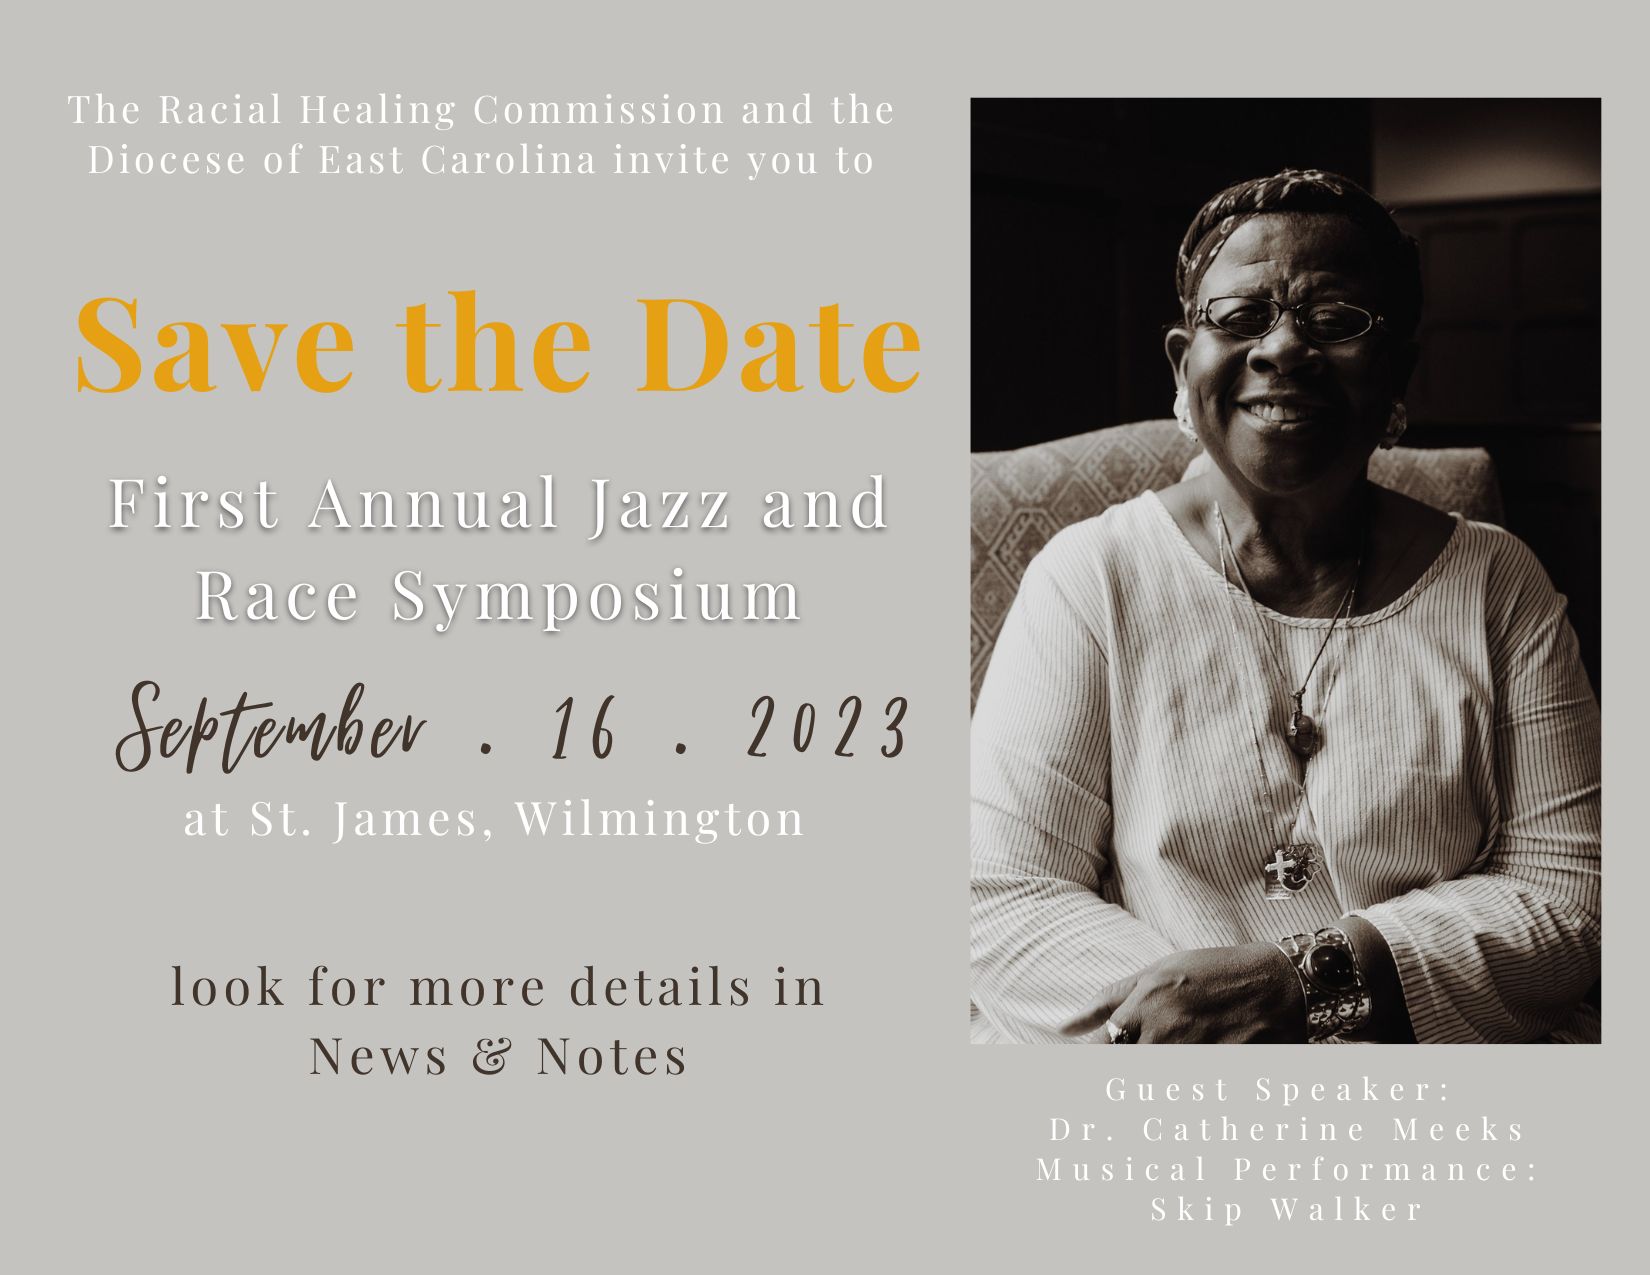 rhc-save-the-date_897